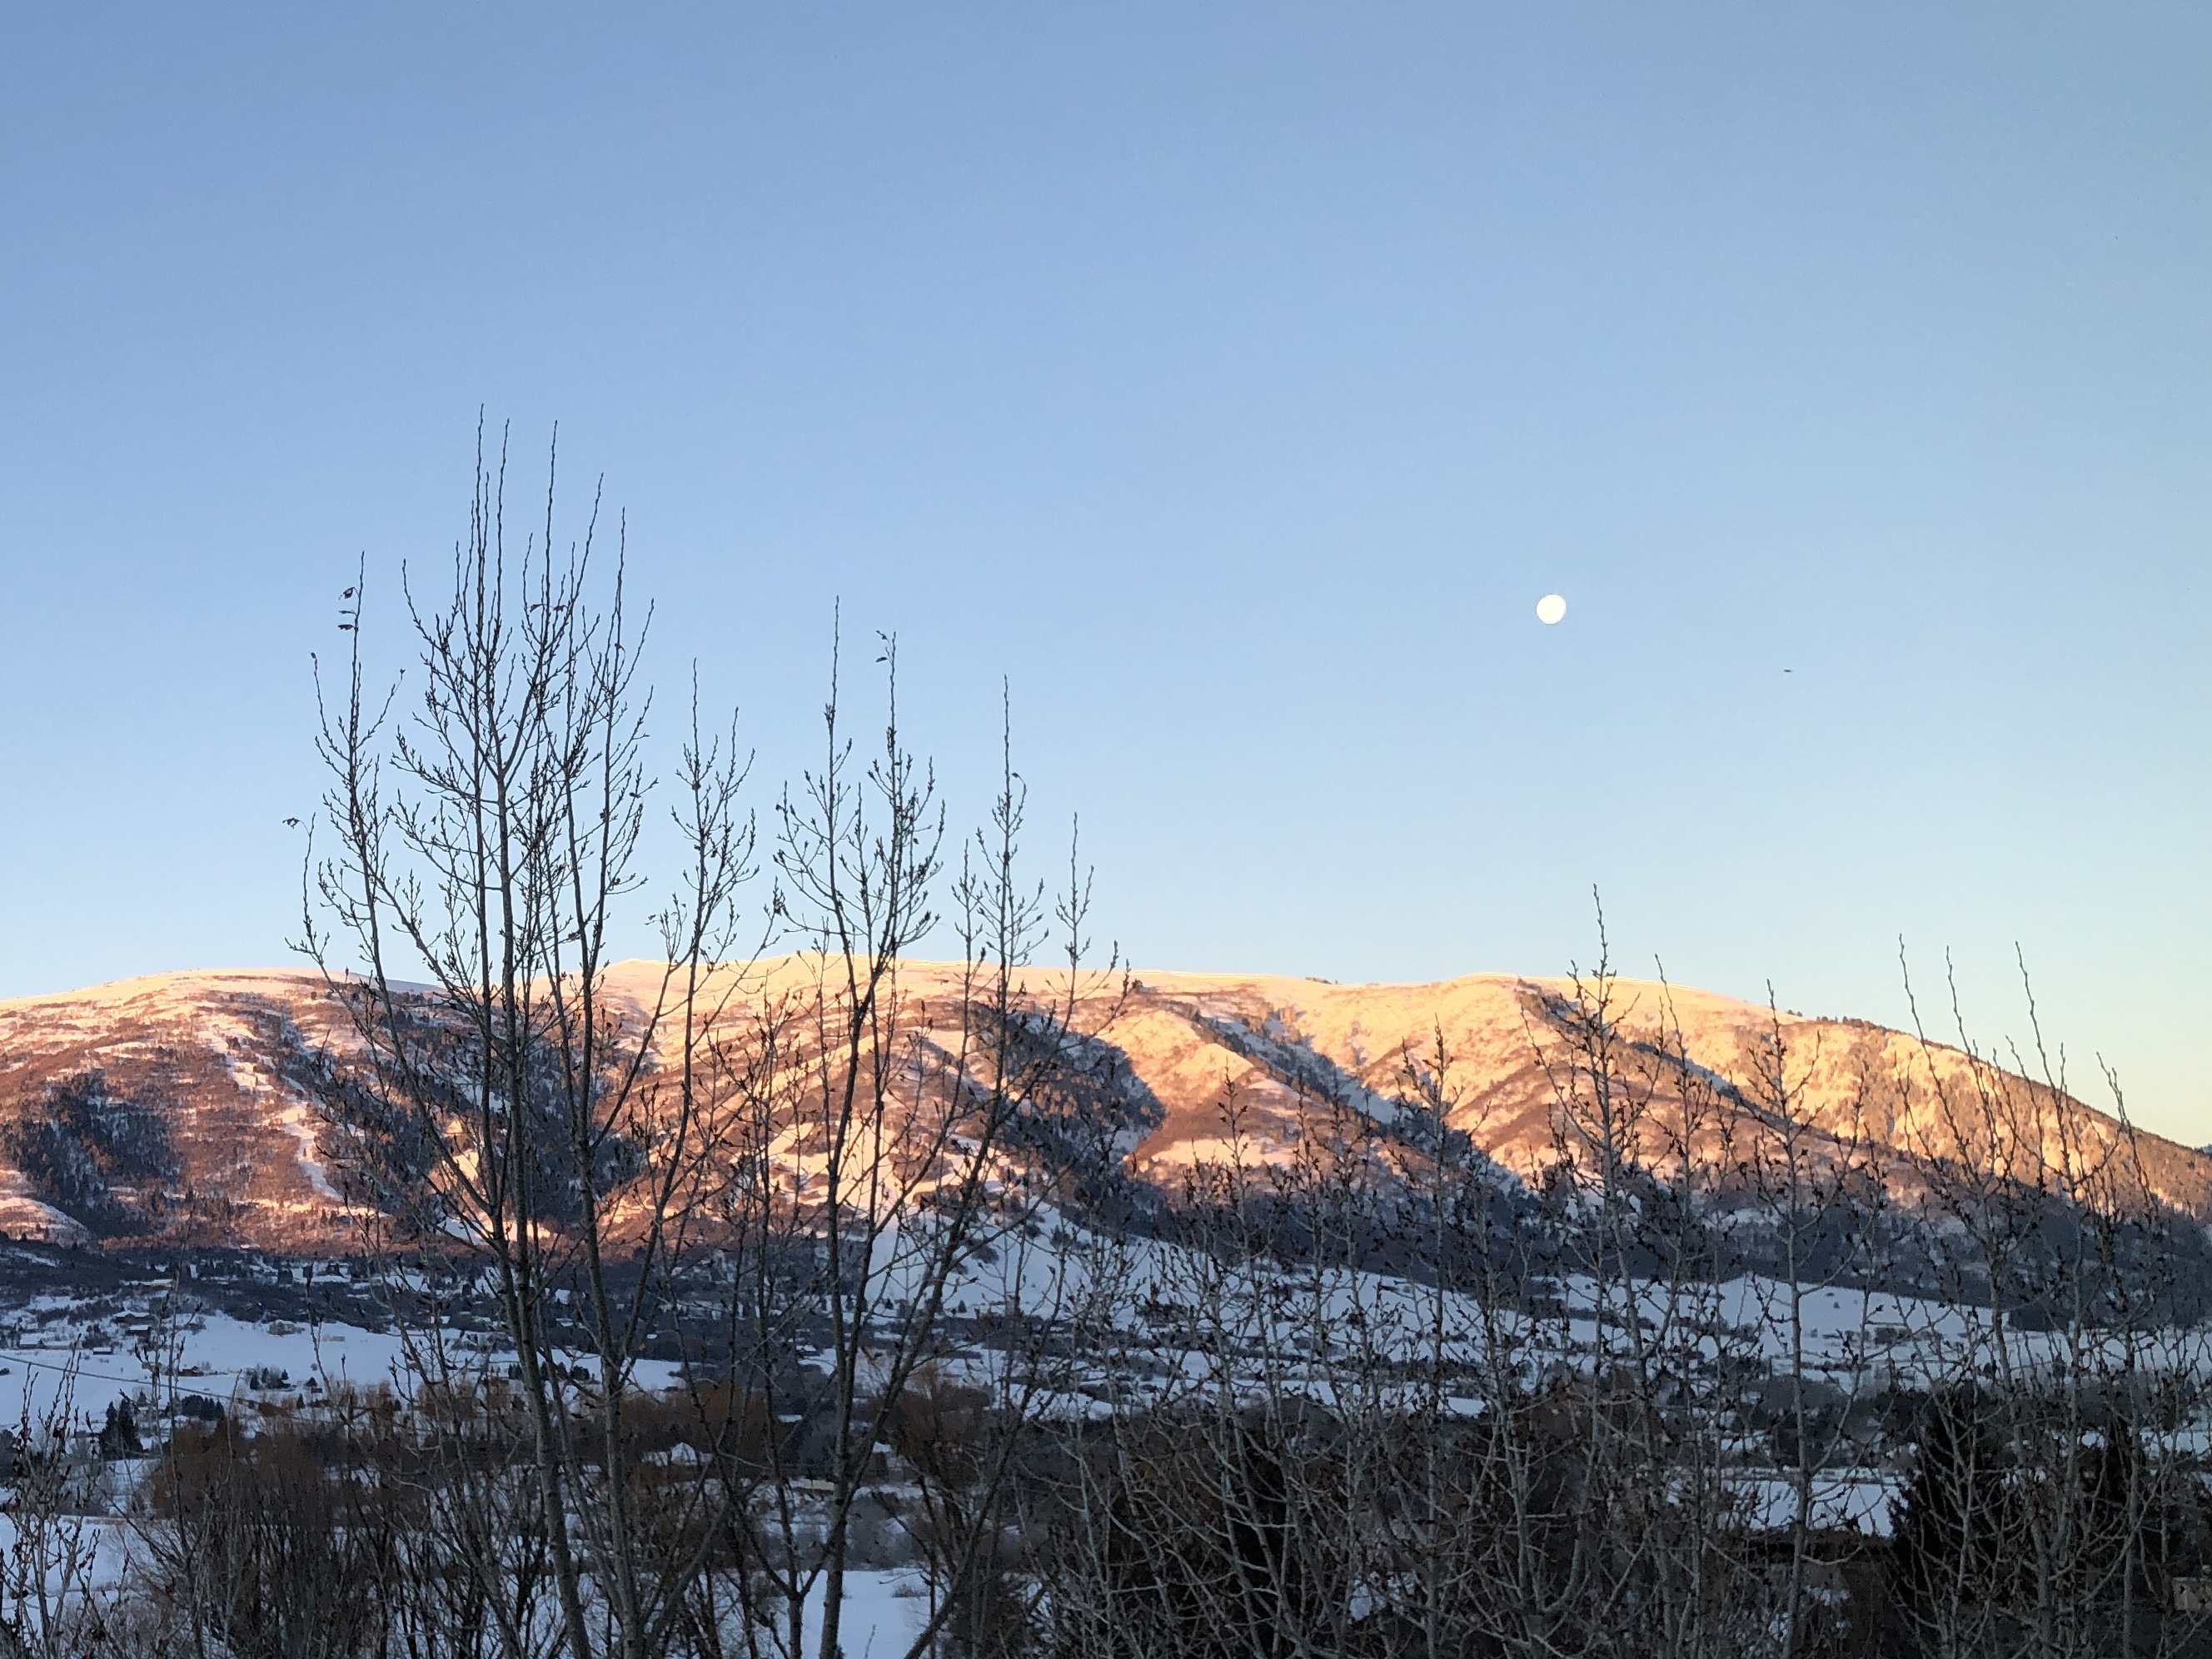 A full moon low over a snowy ridge being touched by morning sun, with trees in the foreground  